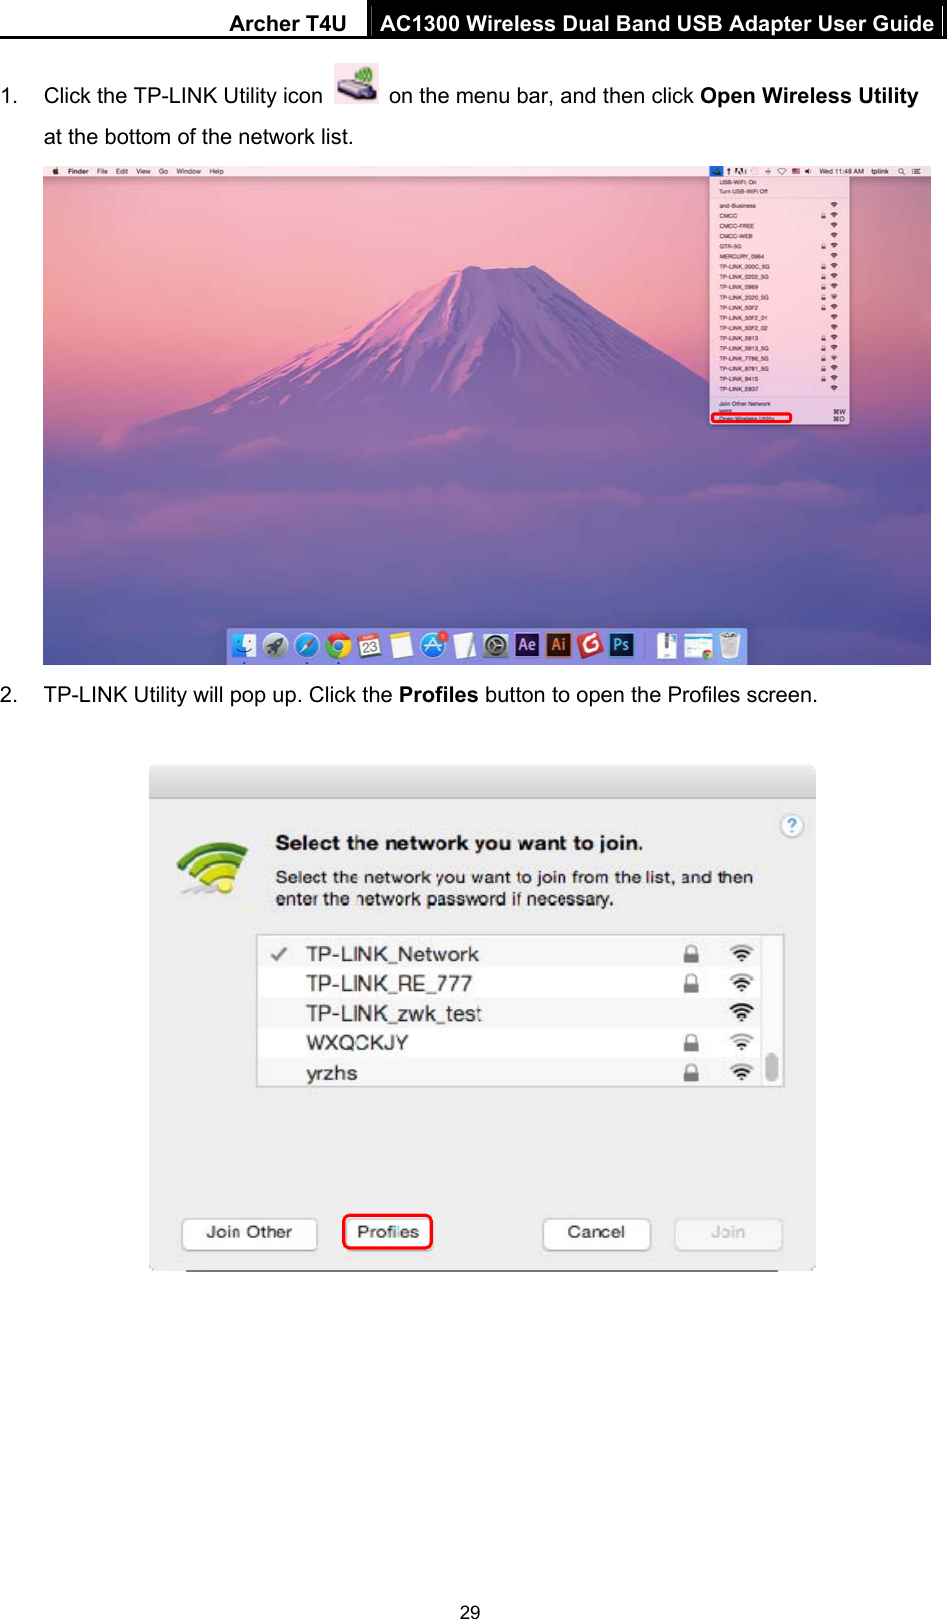 Archer T4U  AC1300 Wireless Dual Band USB Adapter User Guide 29  1.  Click the TP-LINK Utility icon    on the menu bar, and then click Open Wireless Utility at the bottom of the network list.  2.  TP-LINK Utility will pop up. Click the Profiles button to open the Profiles screen.  